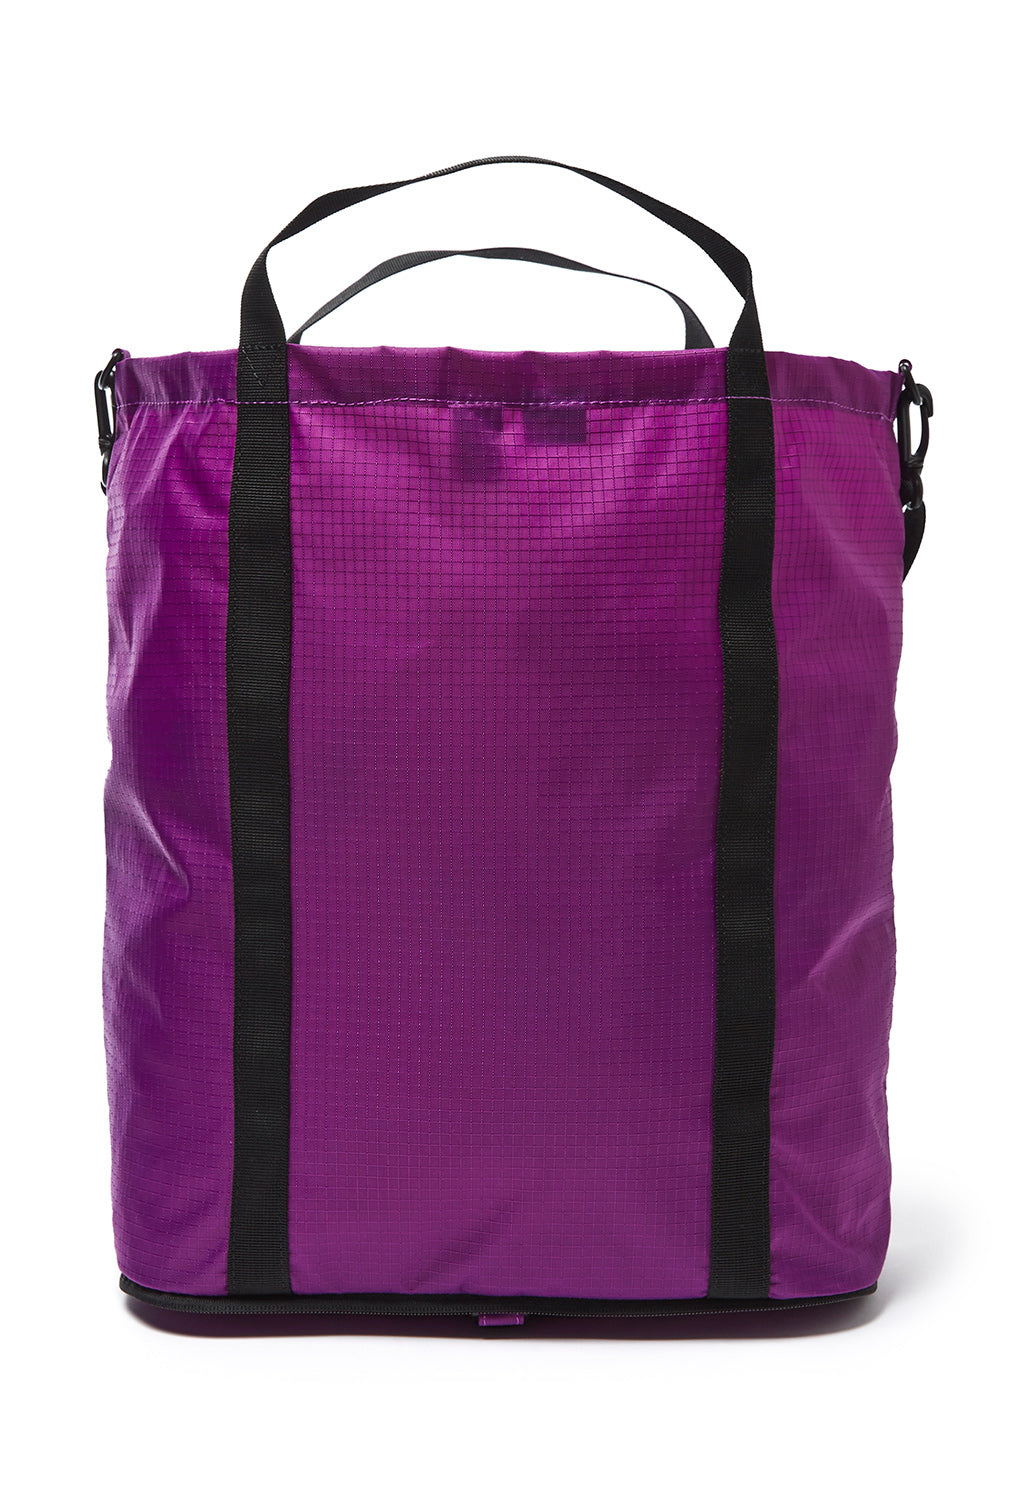 Madden Equipment Funny Tote Pack - Purple Ripstop